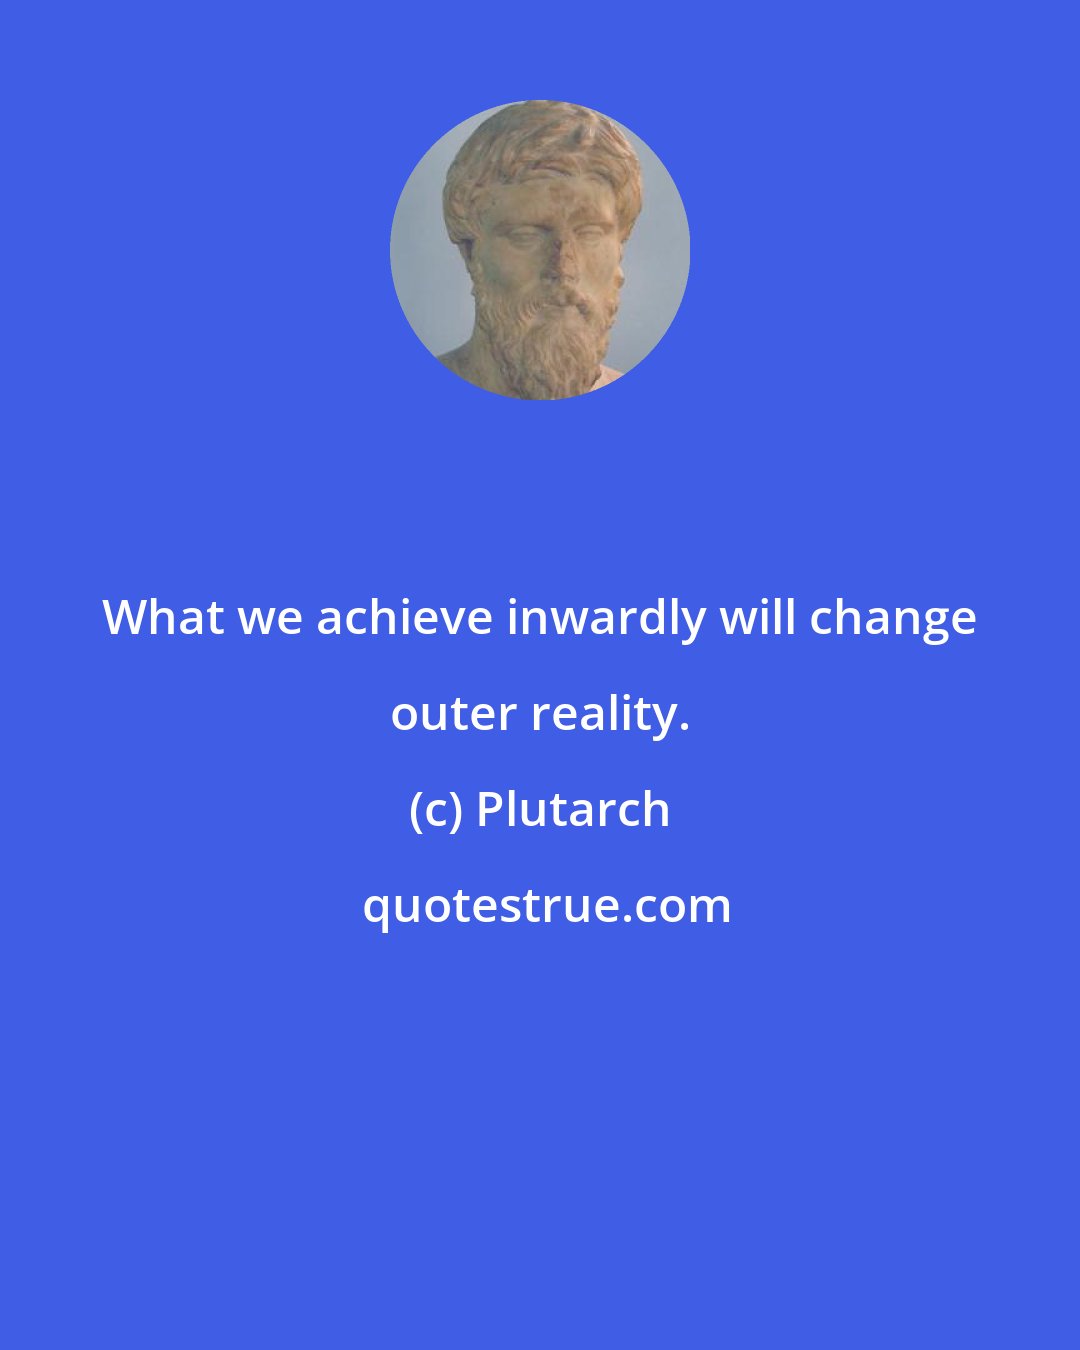 Plutarch: What we achieve inwardly will change outer reality.